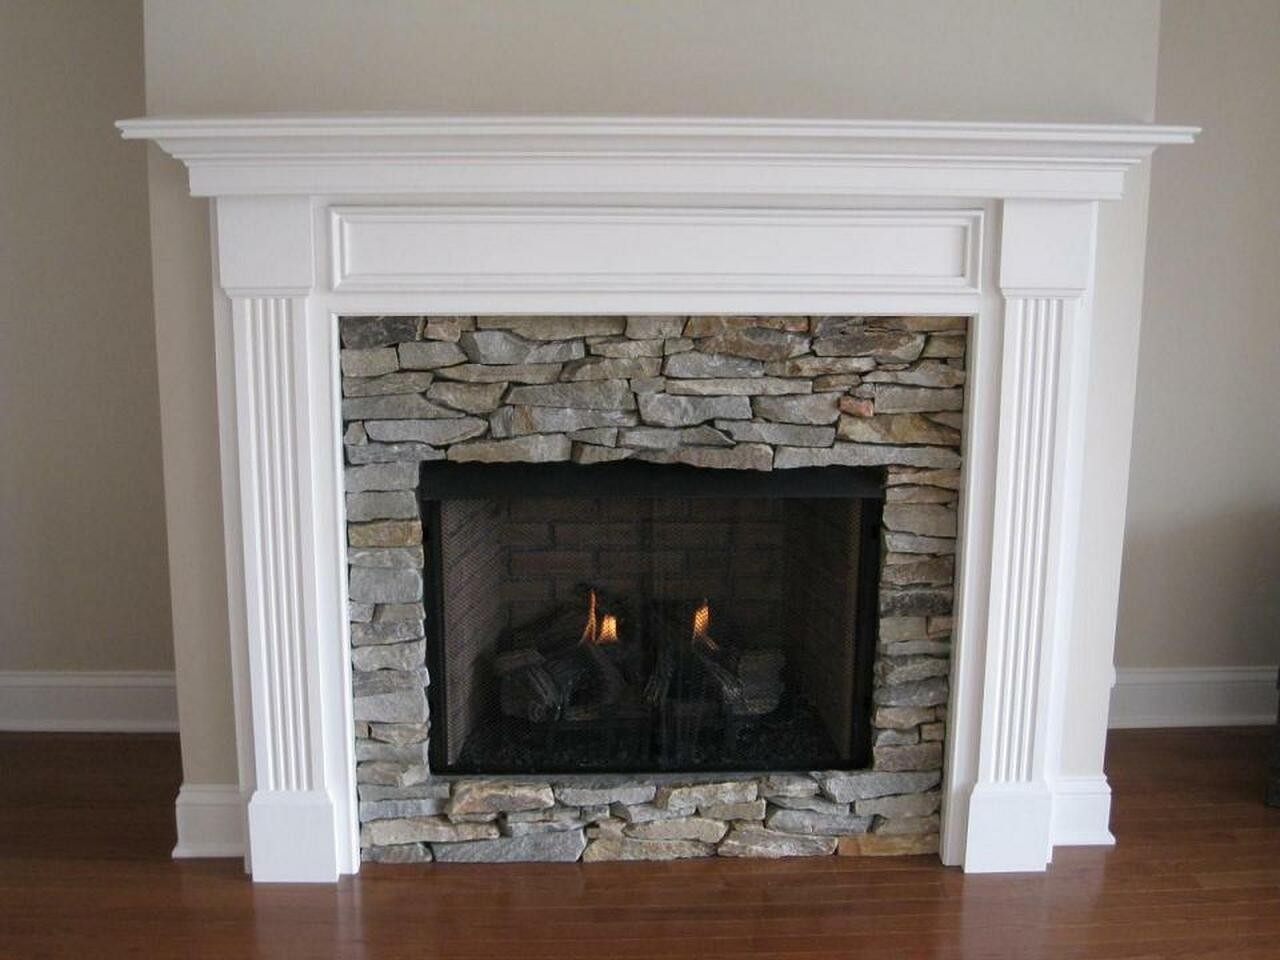 Electric fireplace with shelves